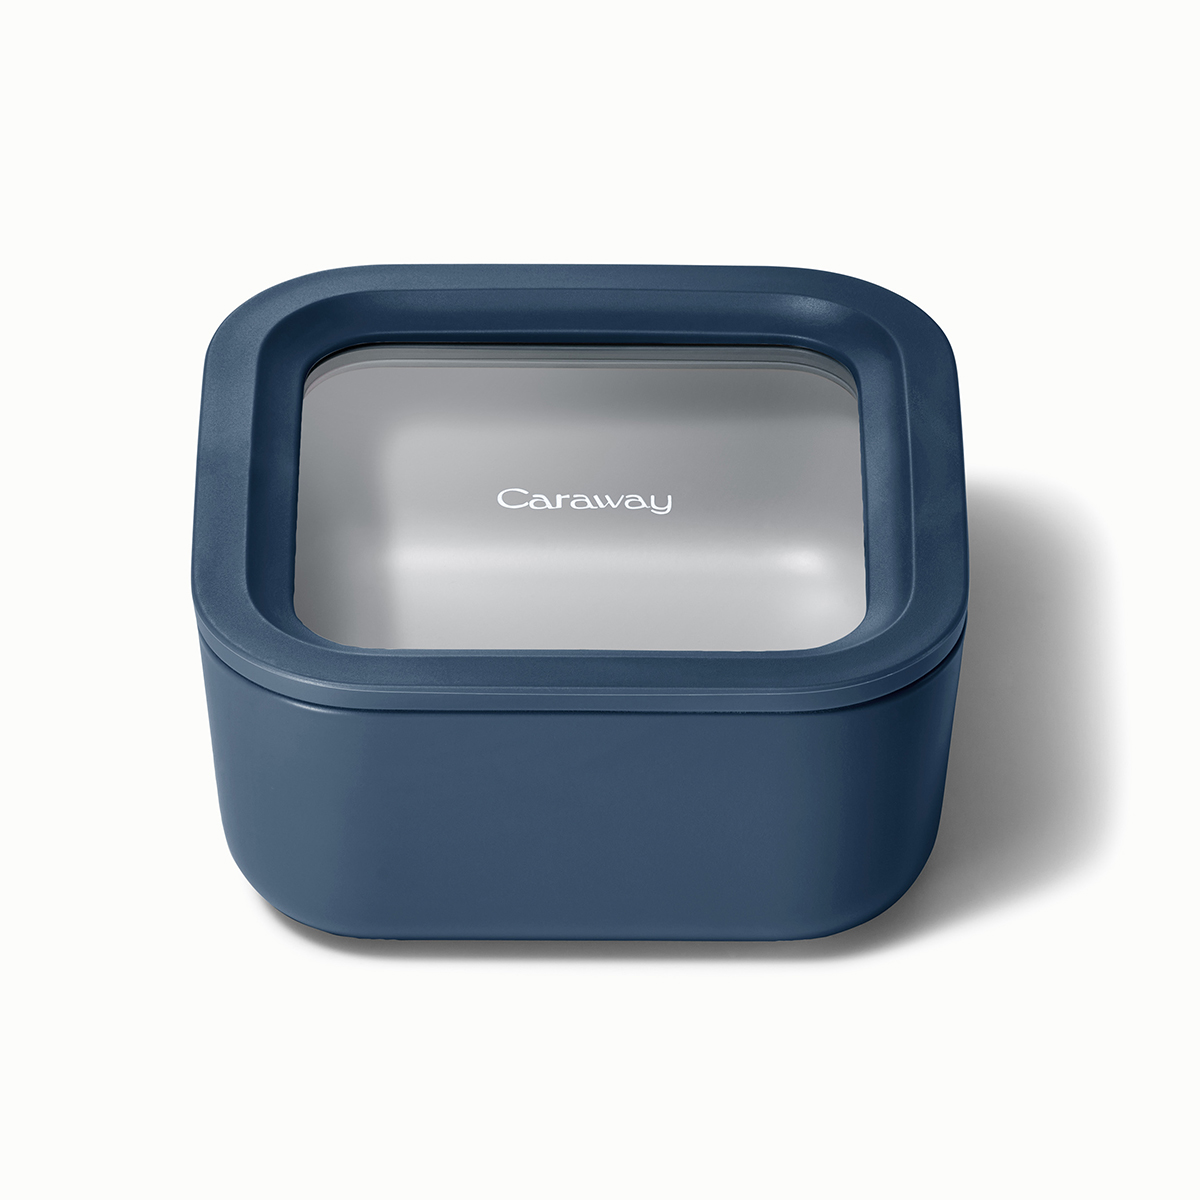 https://www.containerstore.com/catalogimages/516545/10095678-caraway-ven.jpg